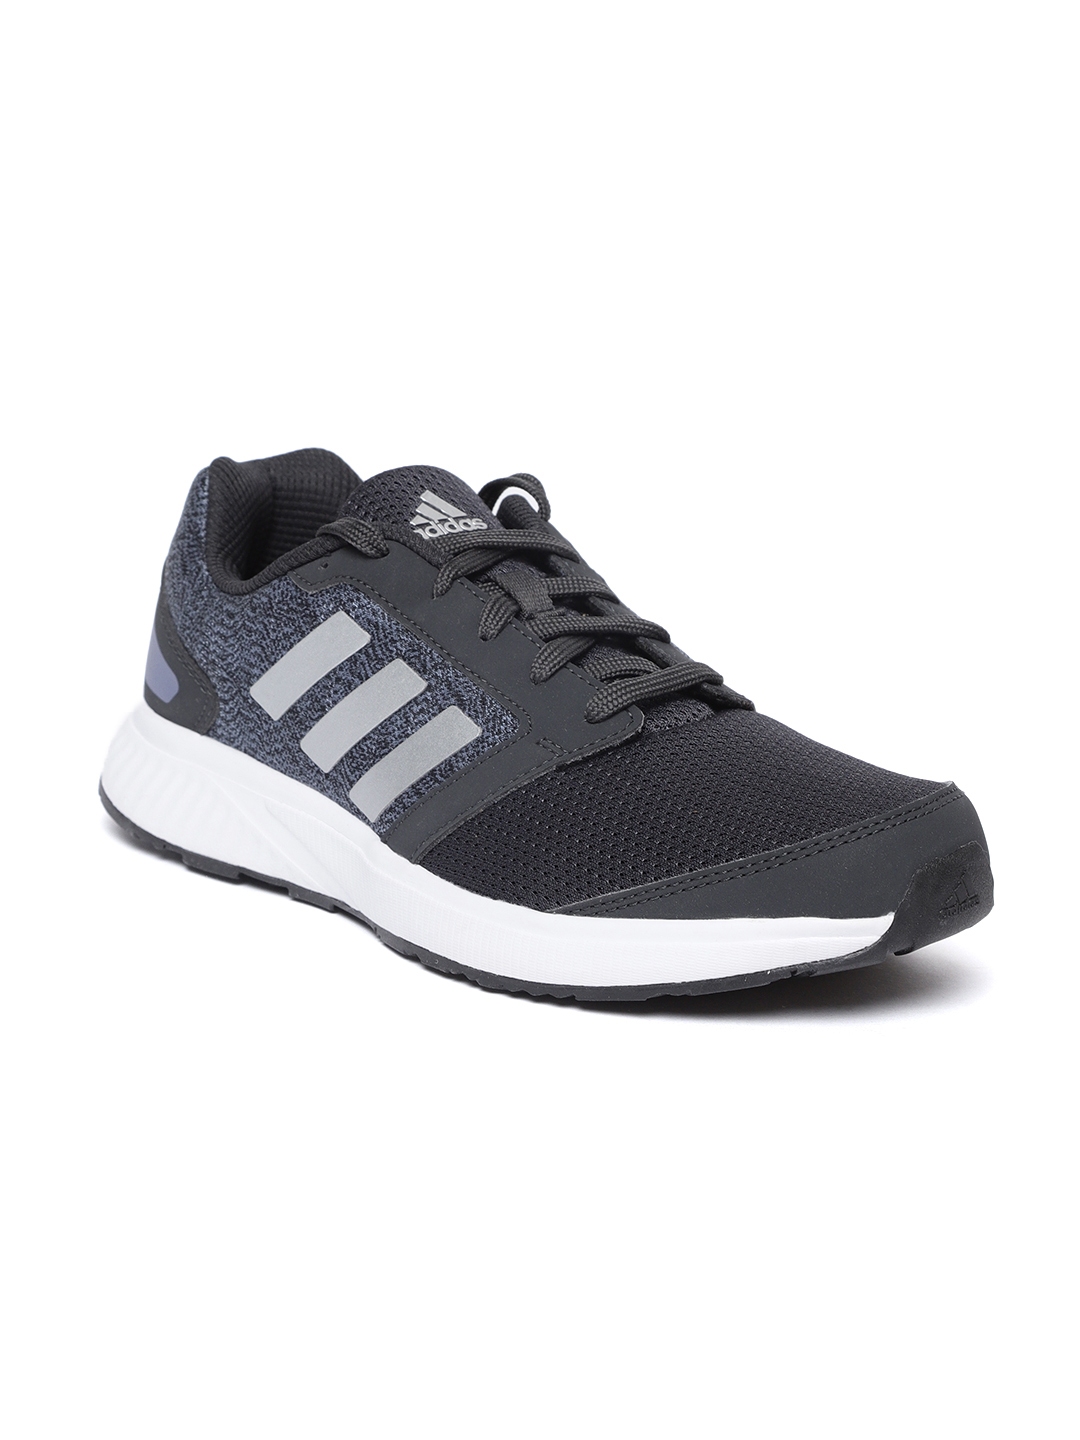 Buy ADIDAS Men Charcoal Grey ADI Pacer 4 Running Shoes - Sports Shoes ...